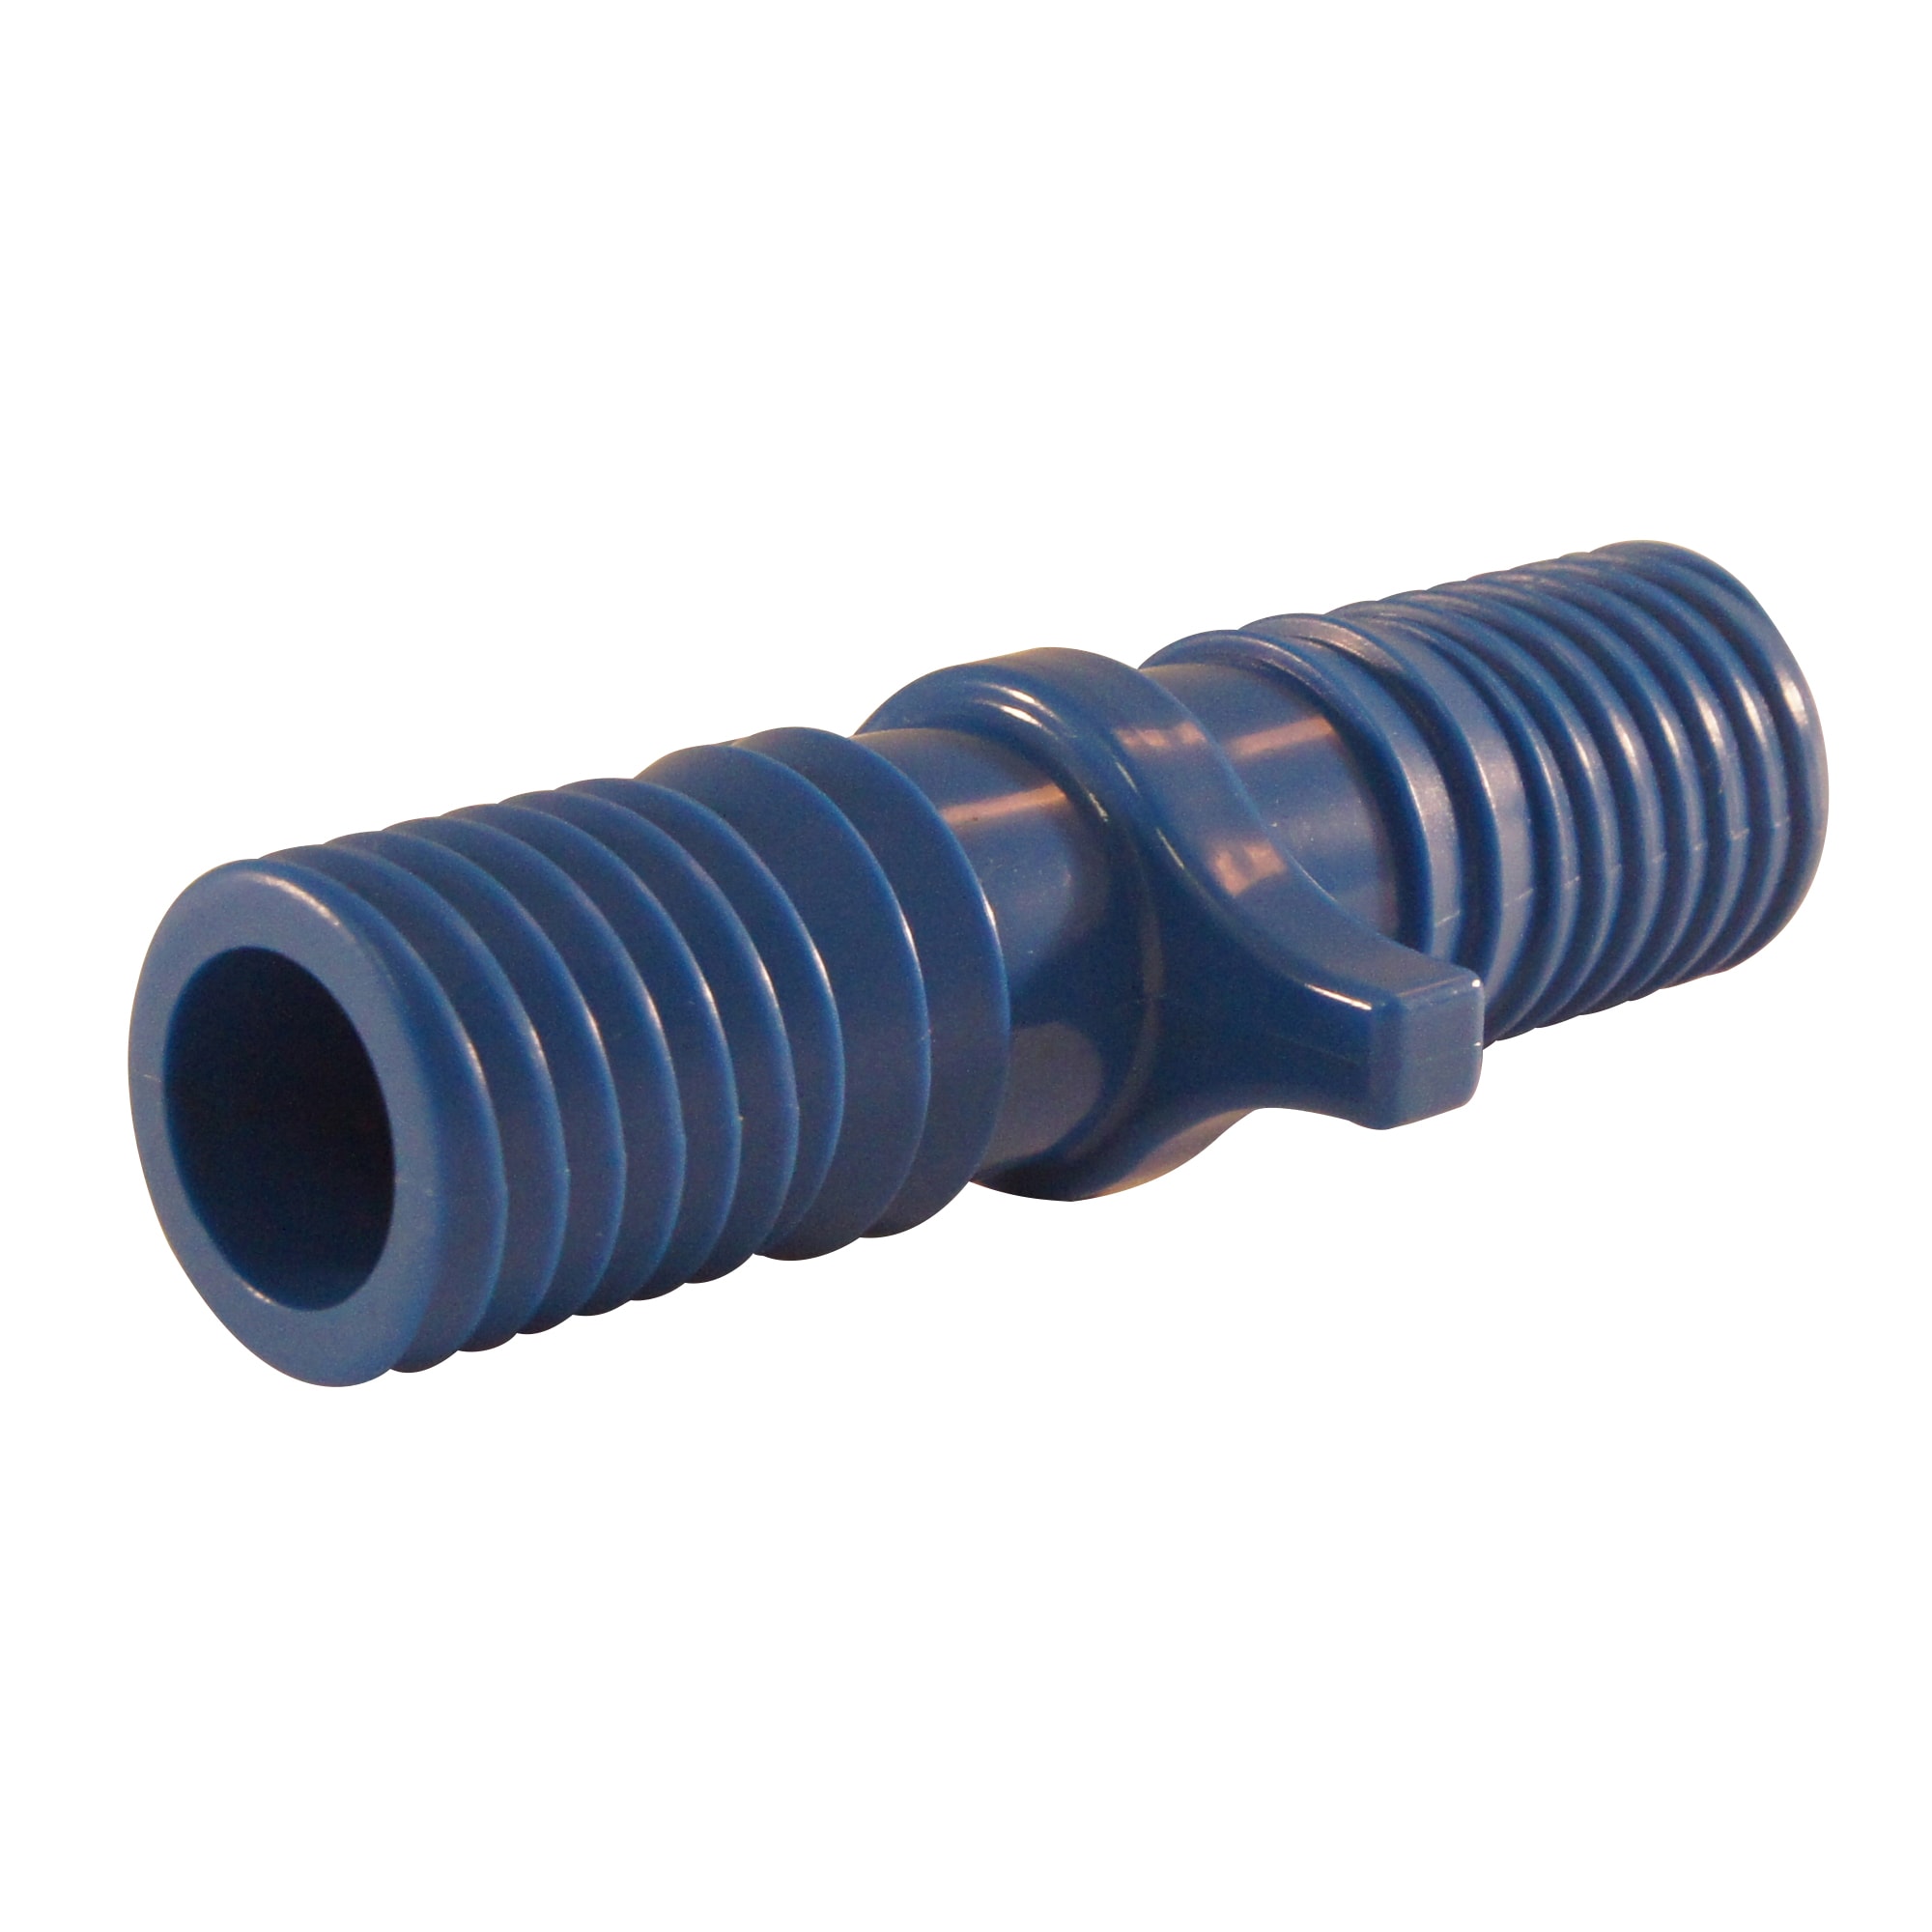 Insert coupling Pipe & Fittings at